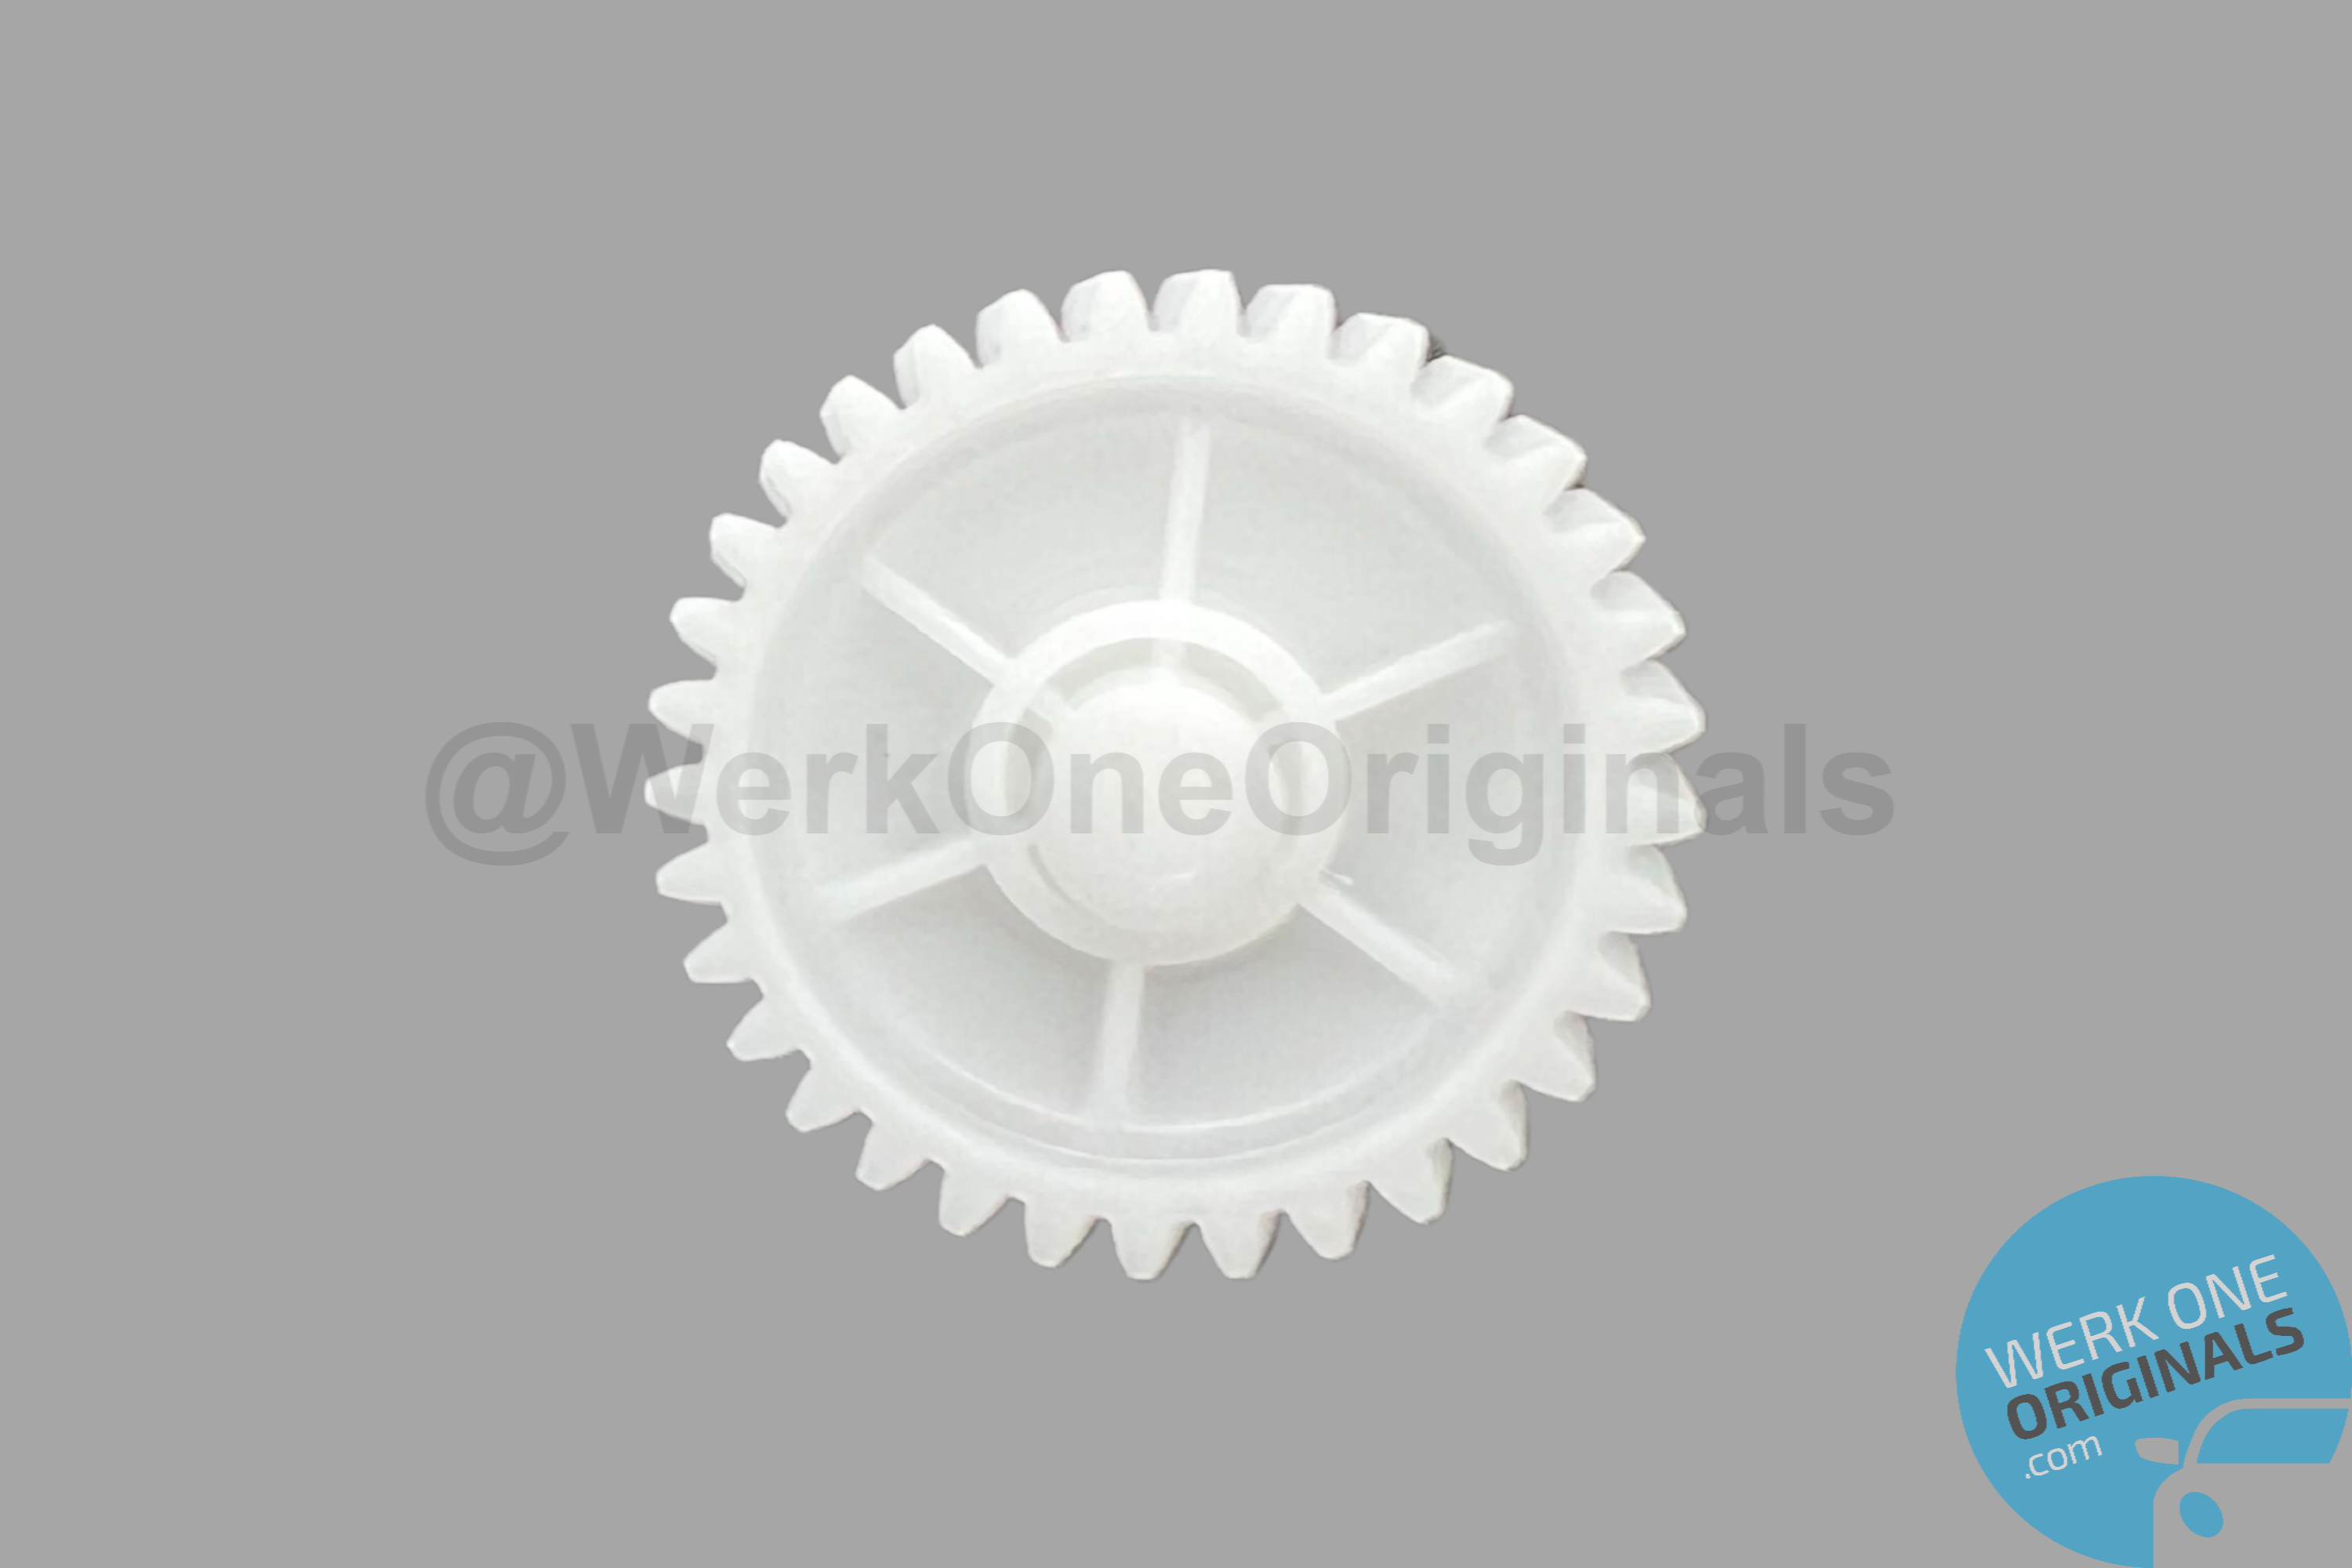 Porsche Genuine Replacement Sunroof Drive Gear for 968 Models